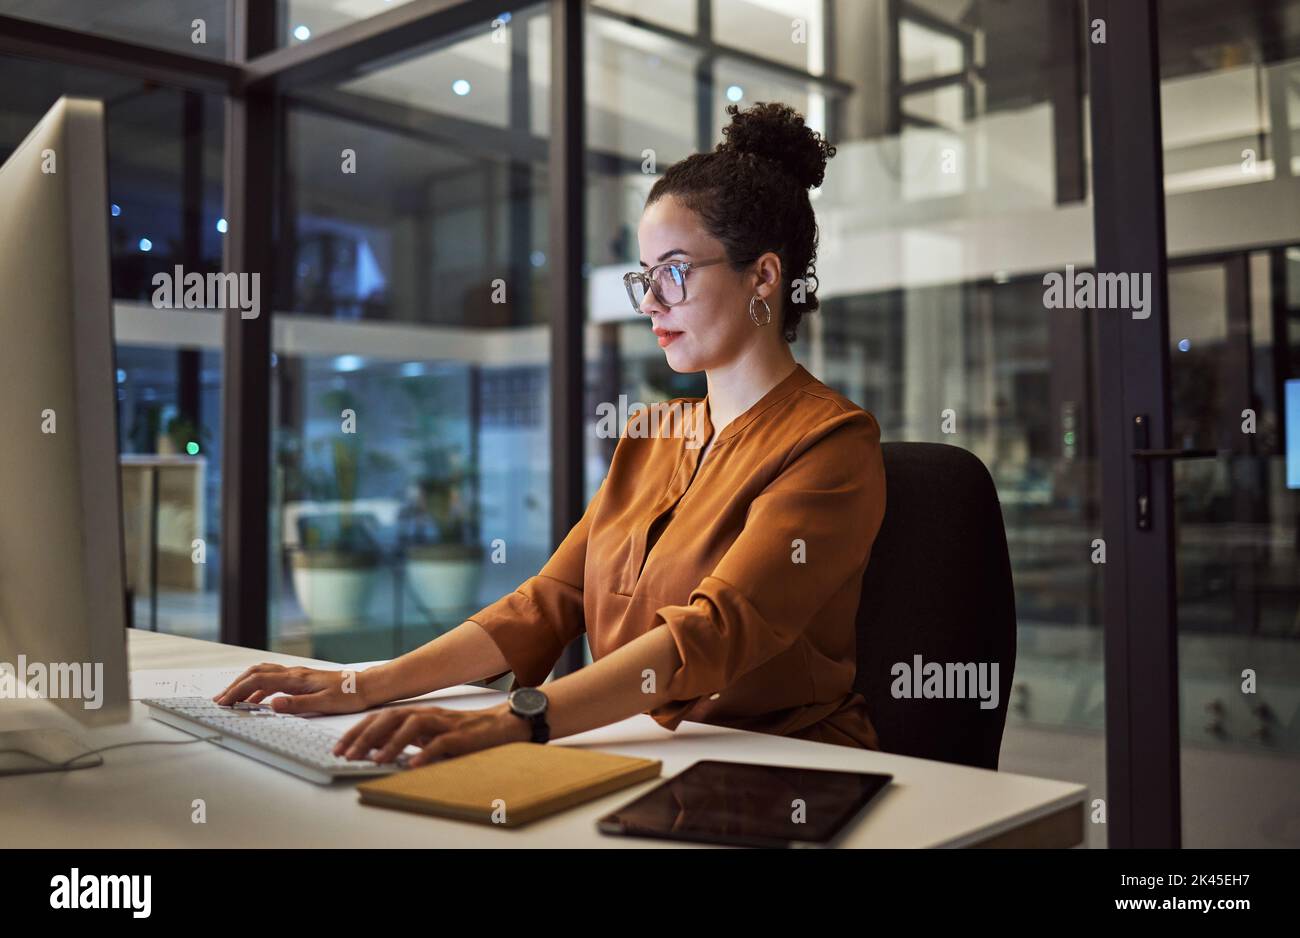 Night, office and woman on computer working on a social media business marketing and advertising project. Desk table, workplace and online brand Stock Photo